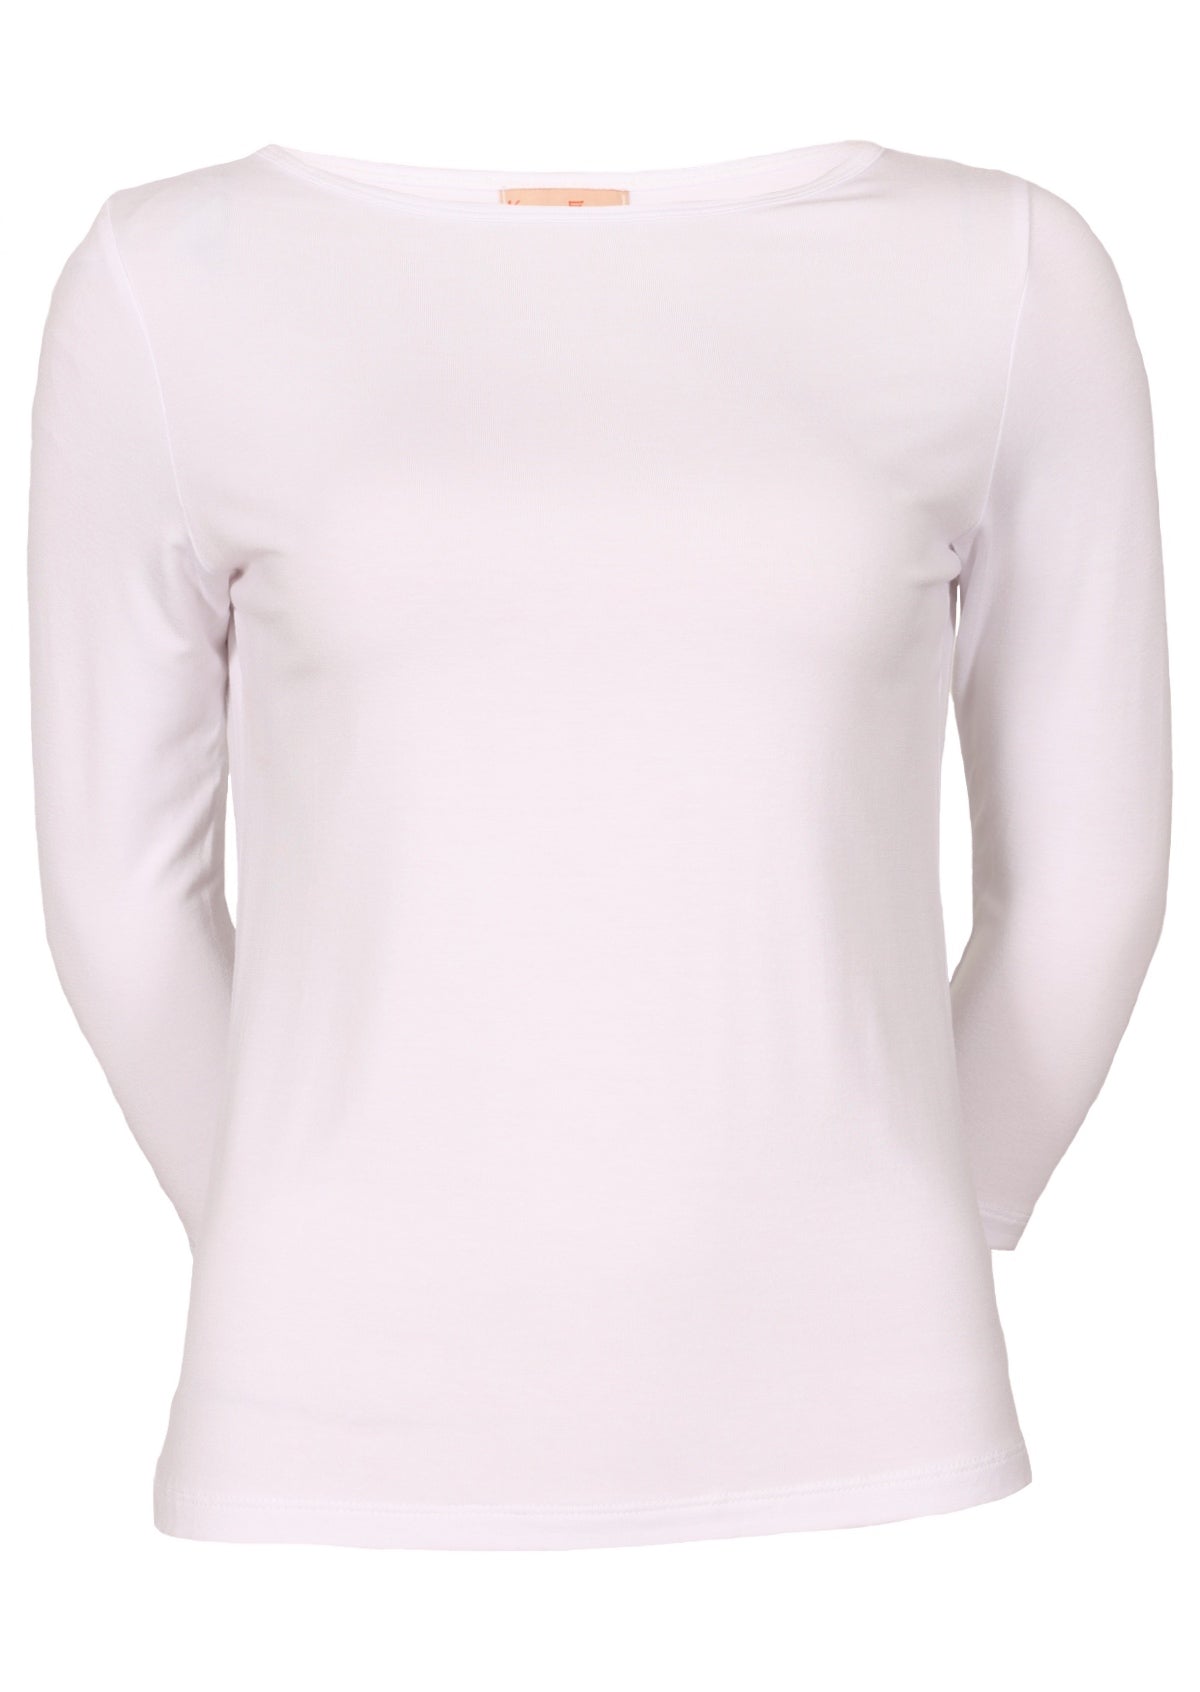 Front view of women's rayon boat neck white 3/4 sleeve top.